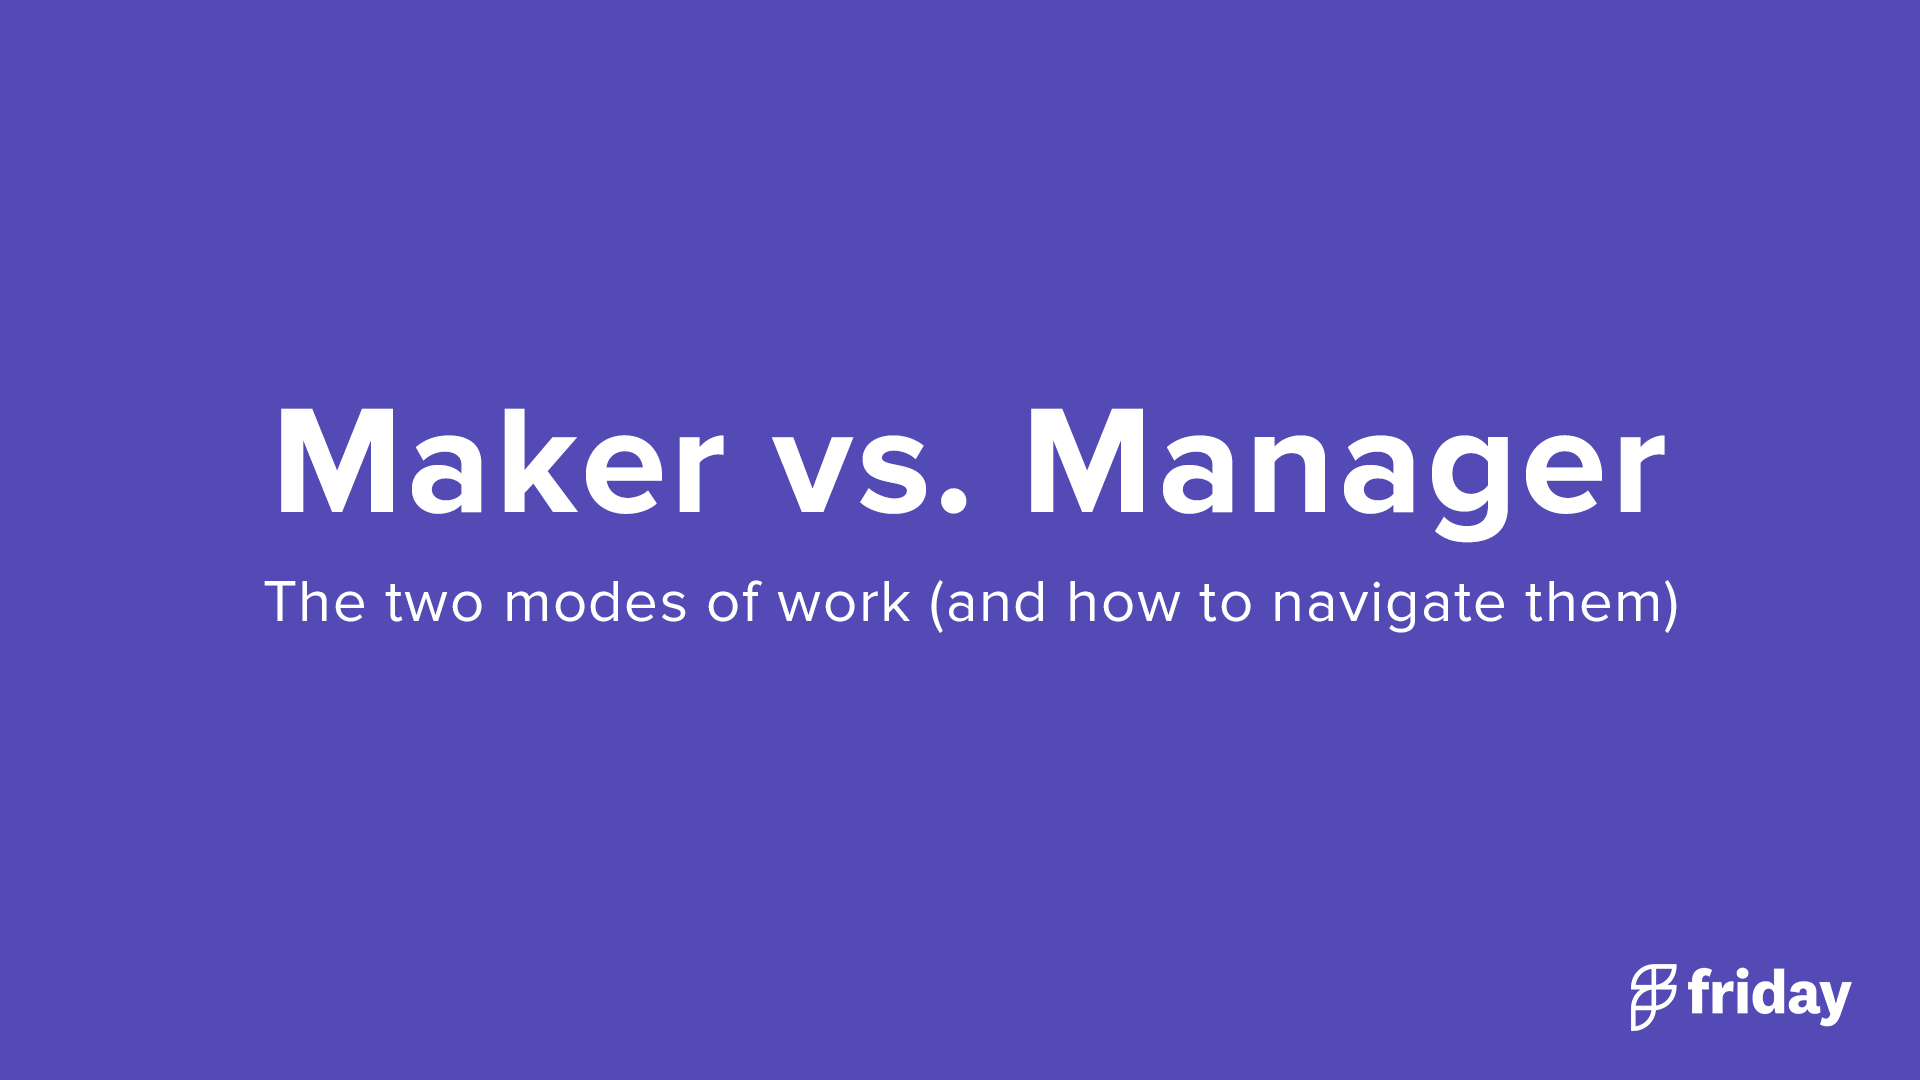 Maker vs. Manager Schedule (a balancing